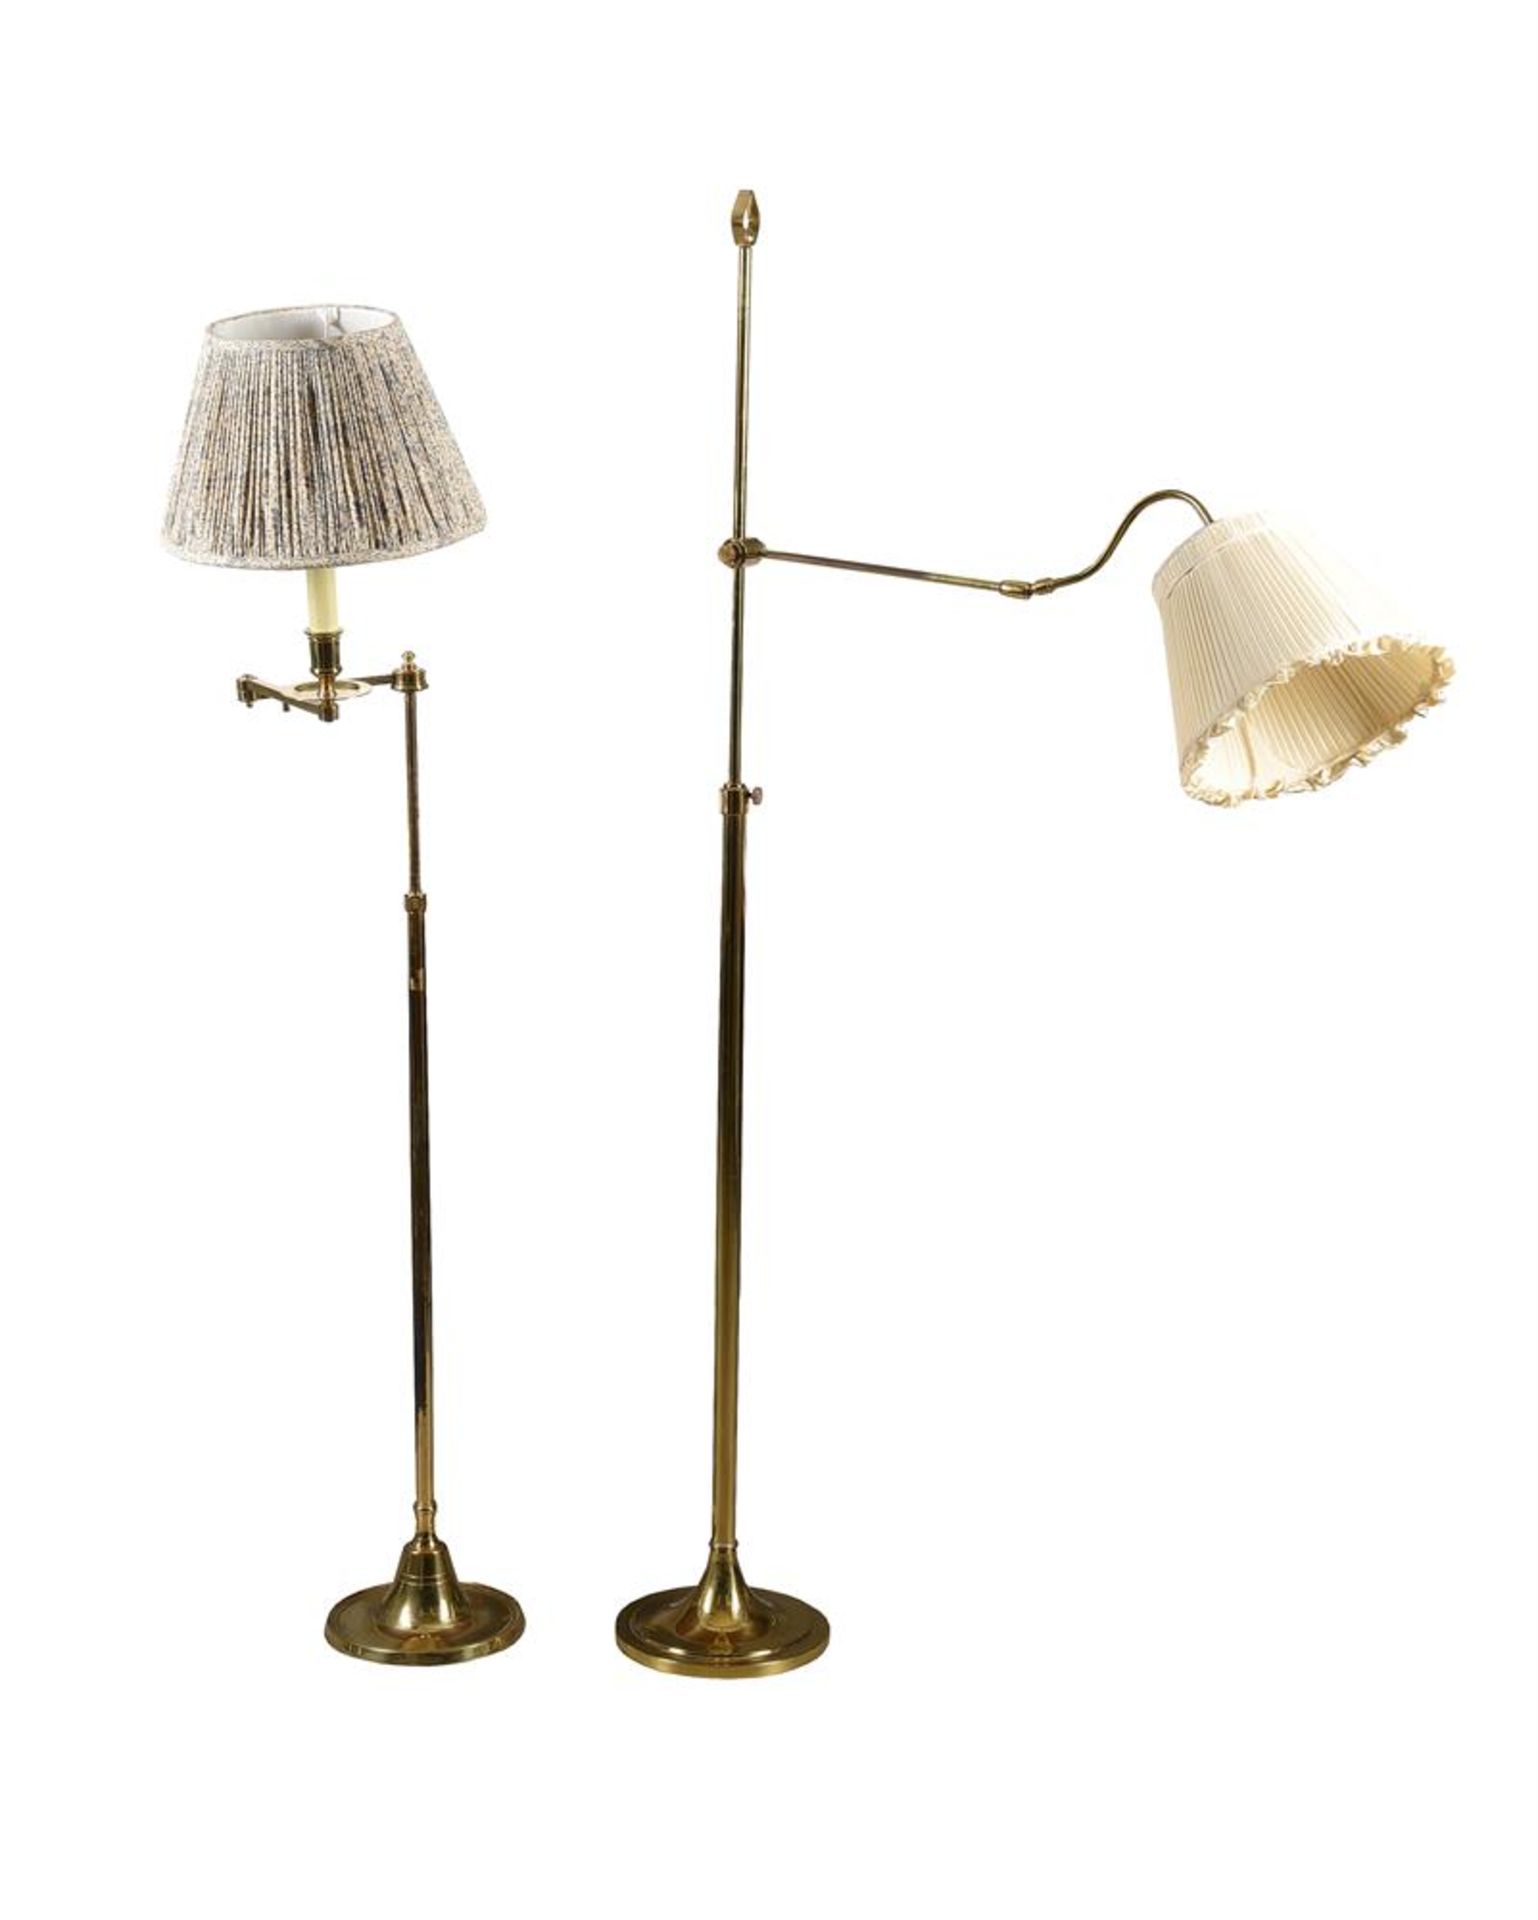 TWO SIMILAR BRASS STANDARD LAMPS, 20TH CENTURY